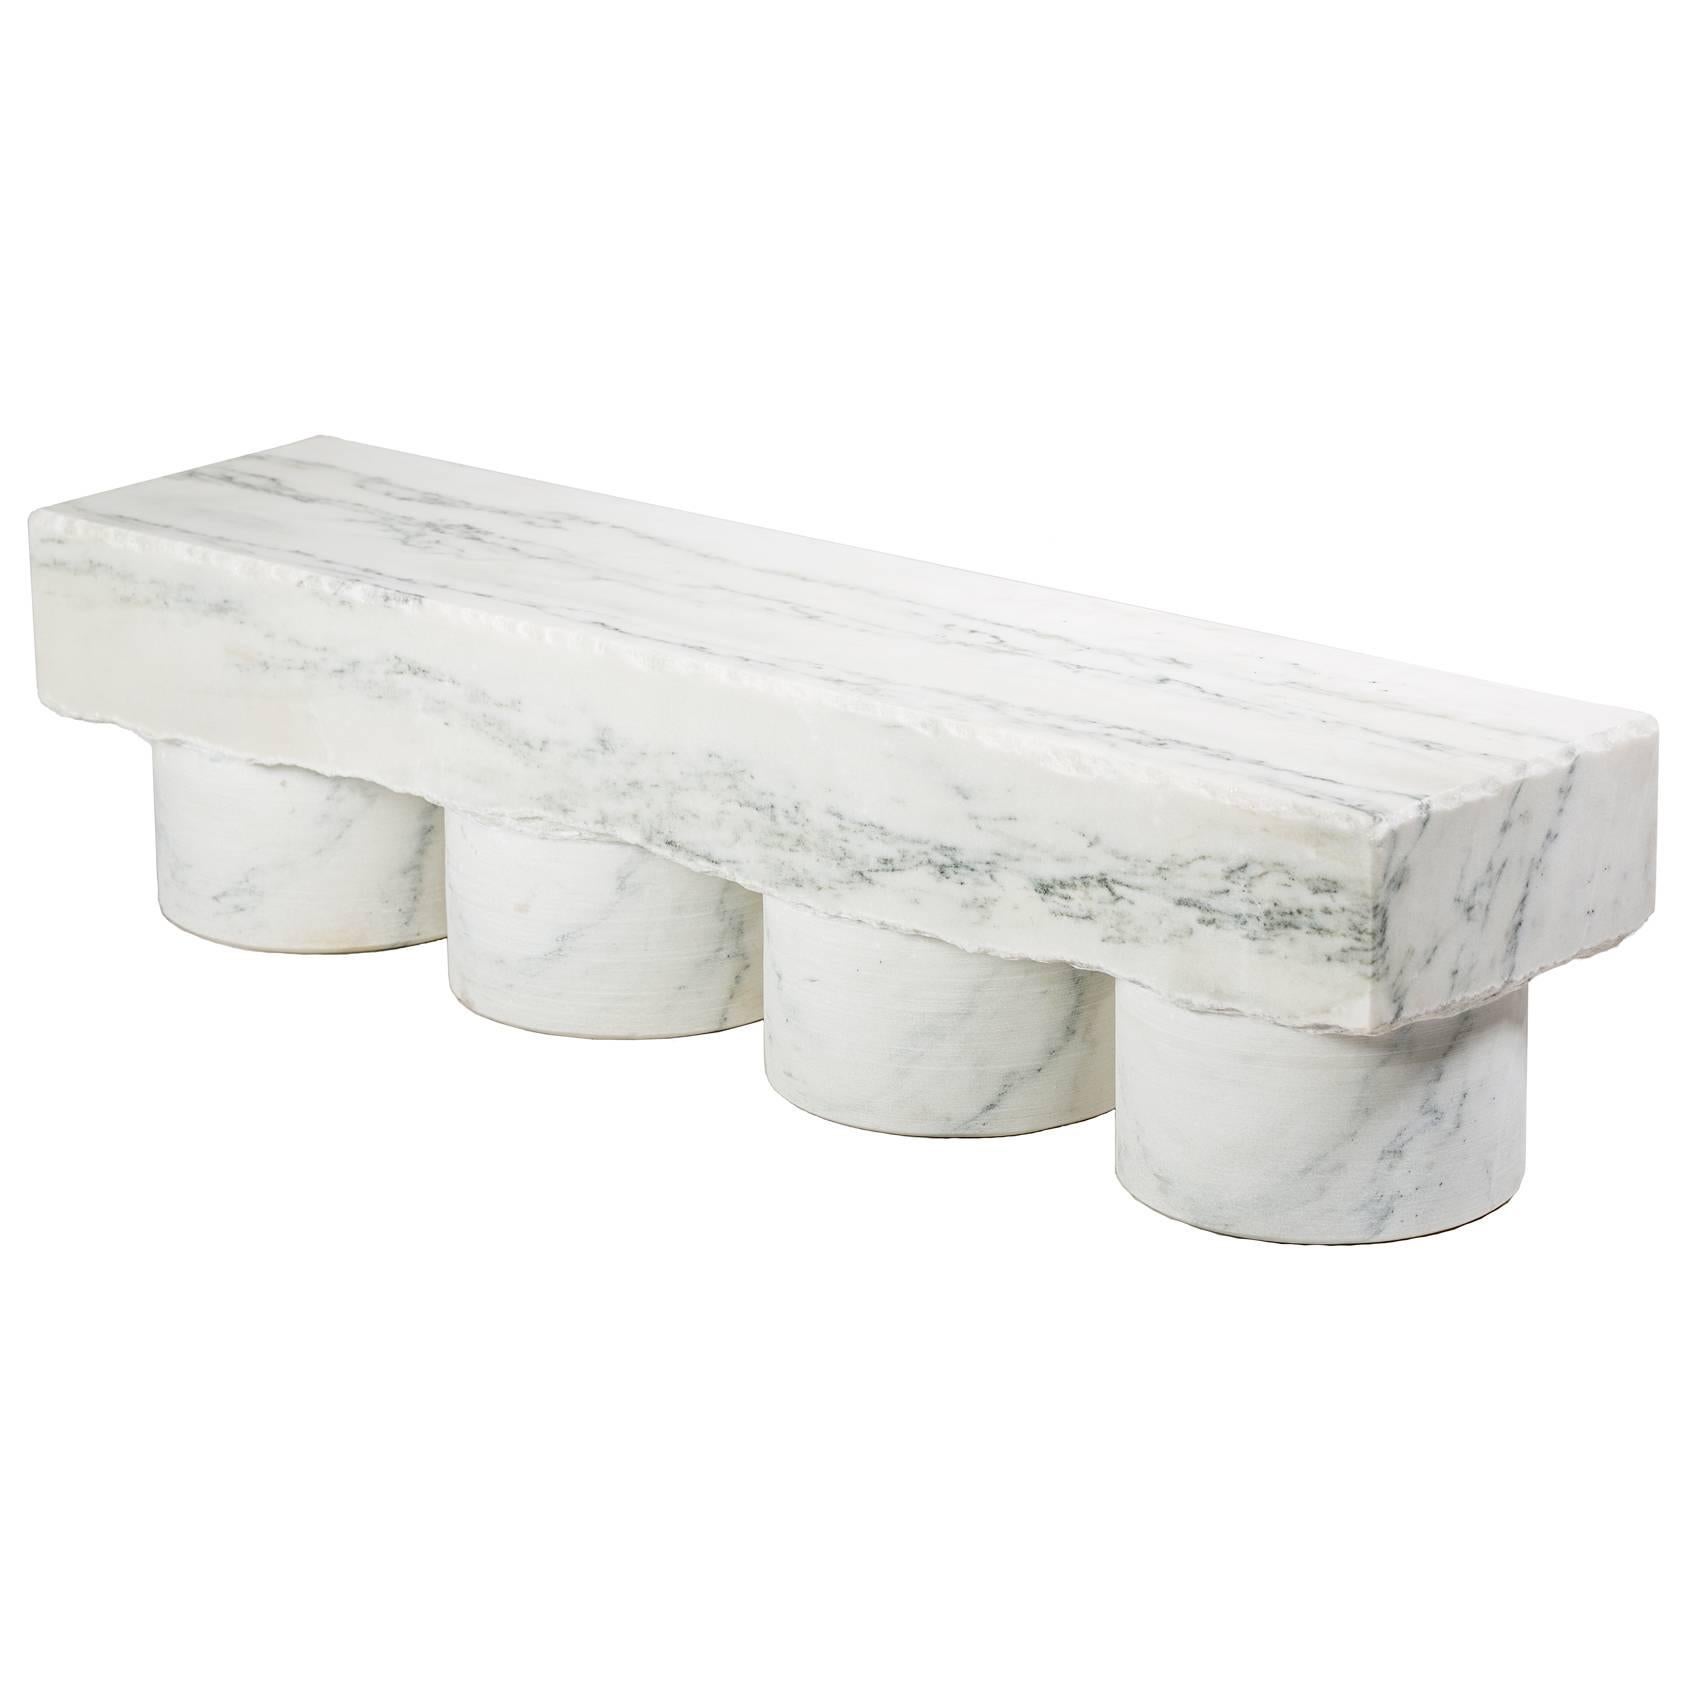 Max Lamb, Danby Marble Bench For Sale